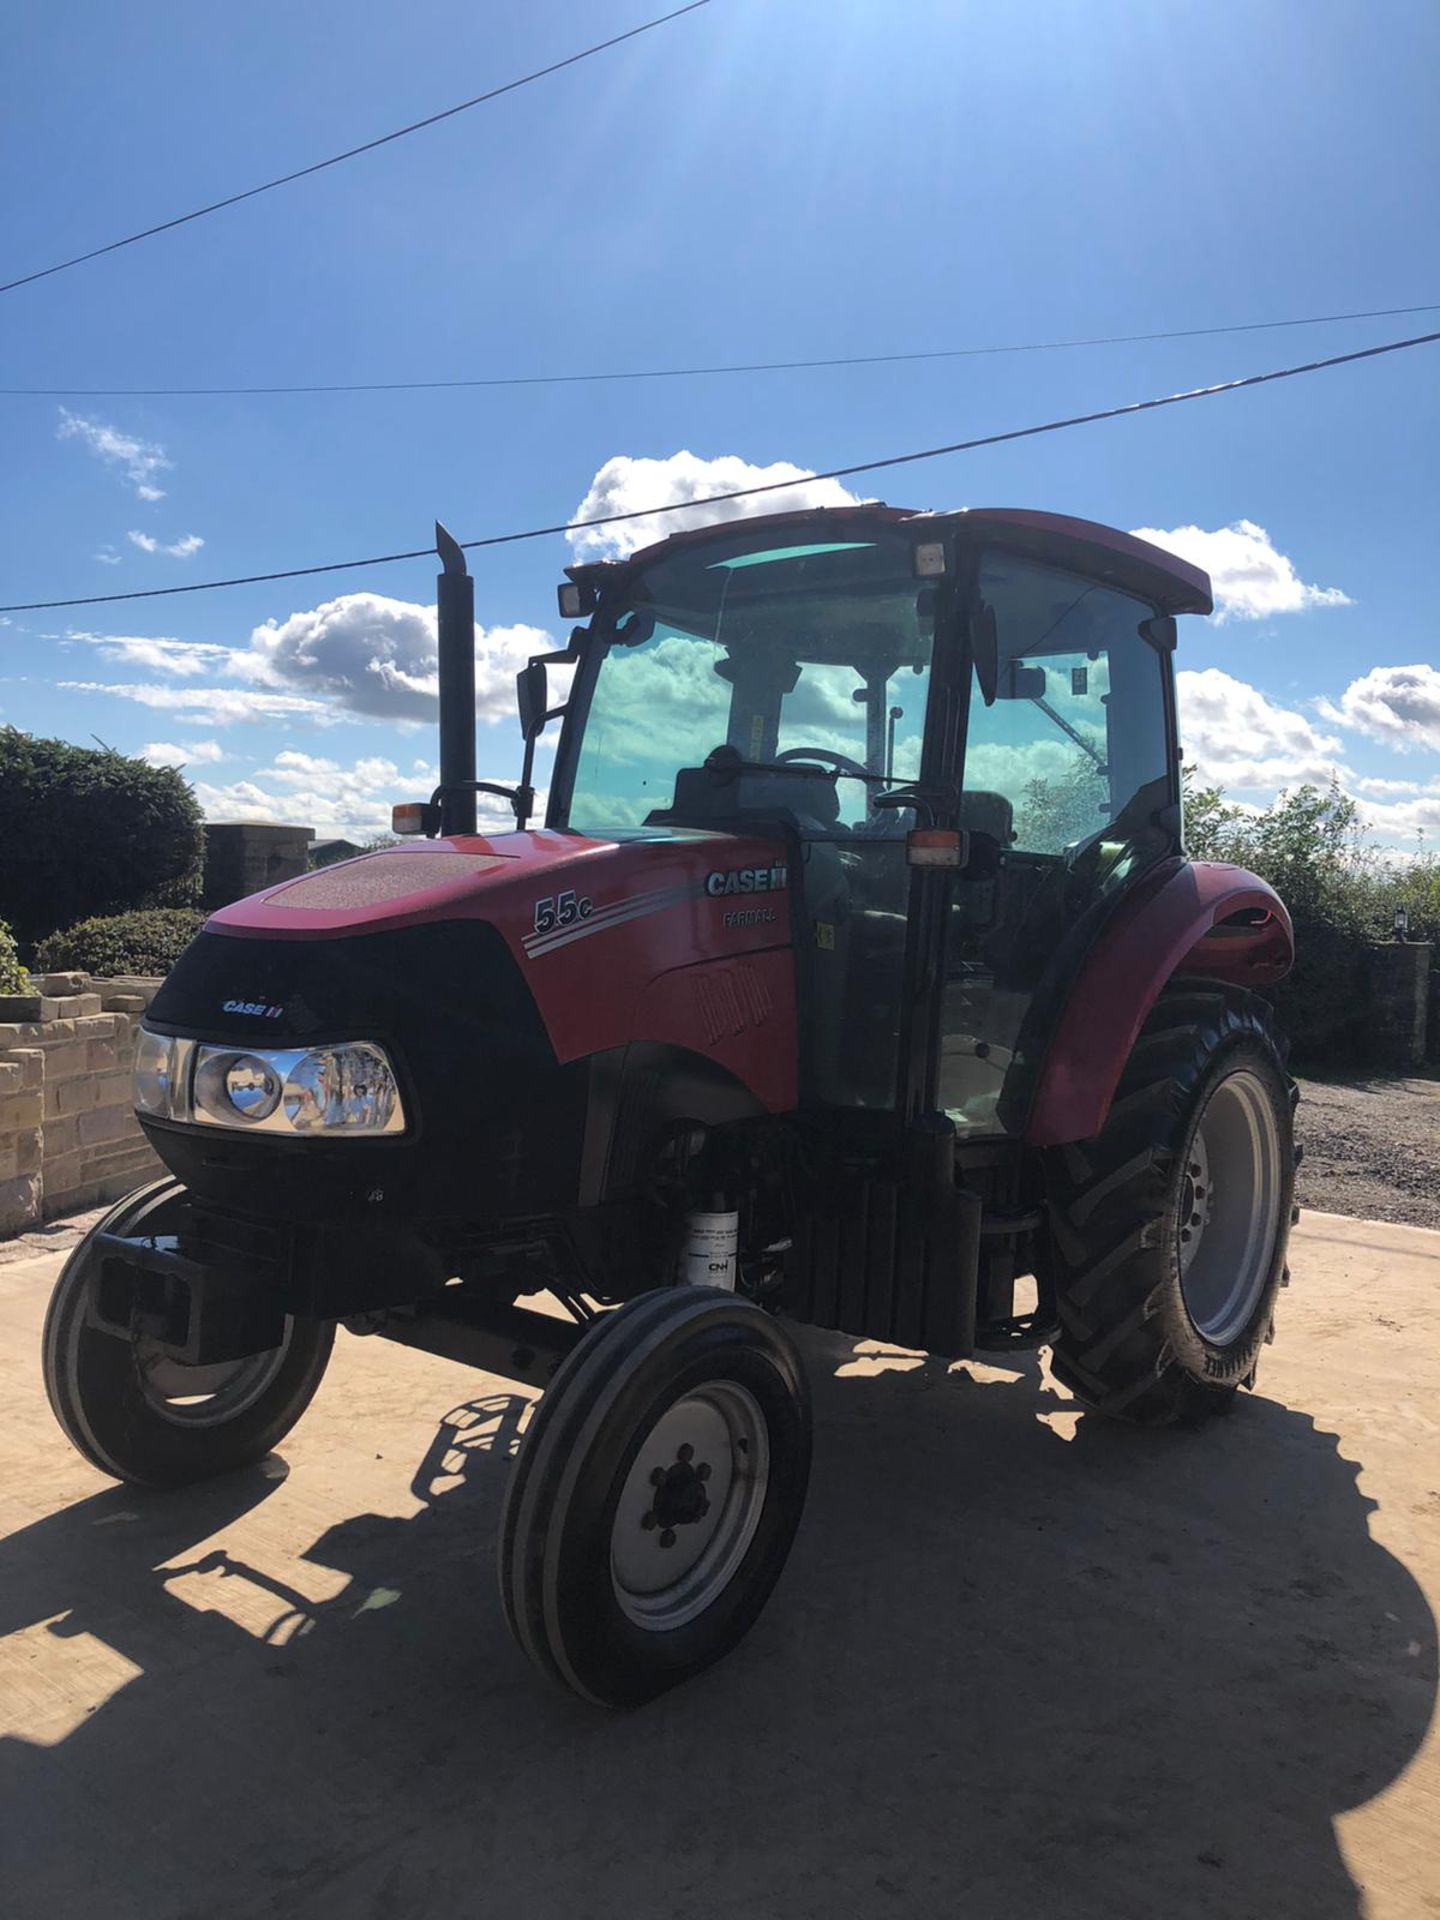 2018 CASE FARM IH 55C TRACTOR 2WD, RUNS AND DRIVES, EX DEMO CONDITION, CLEAN MACHINE *PLUS VAT* - Image 2 of 5